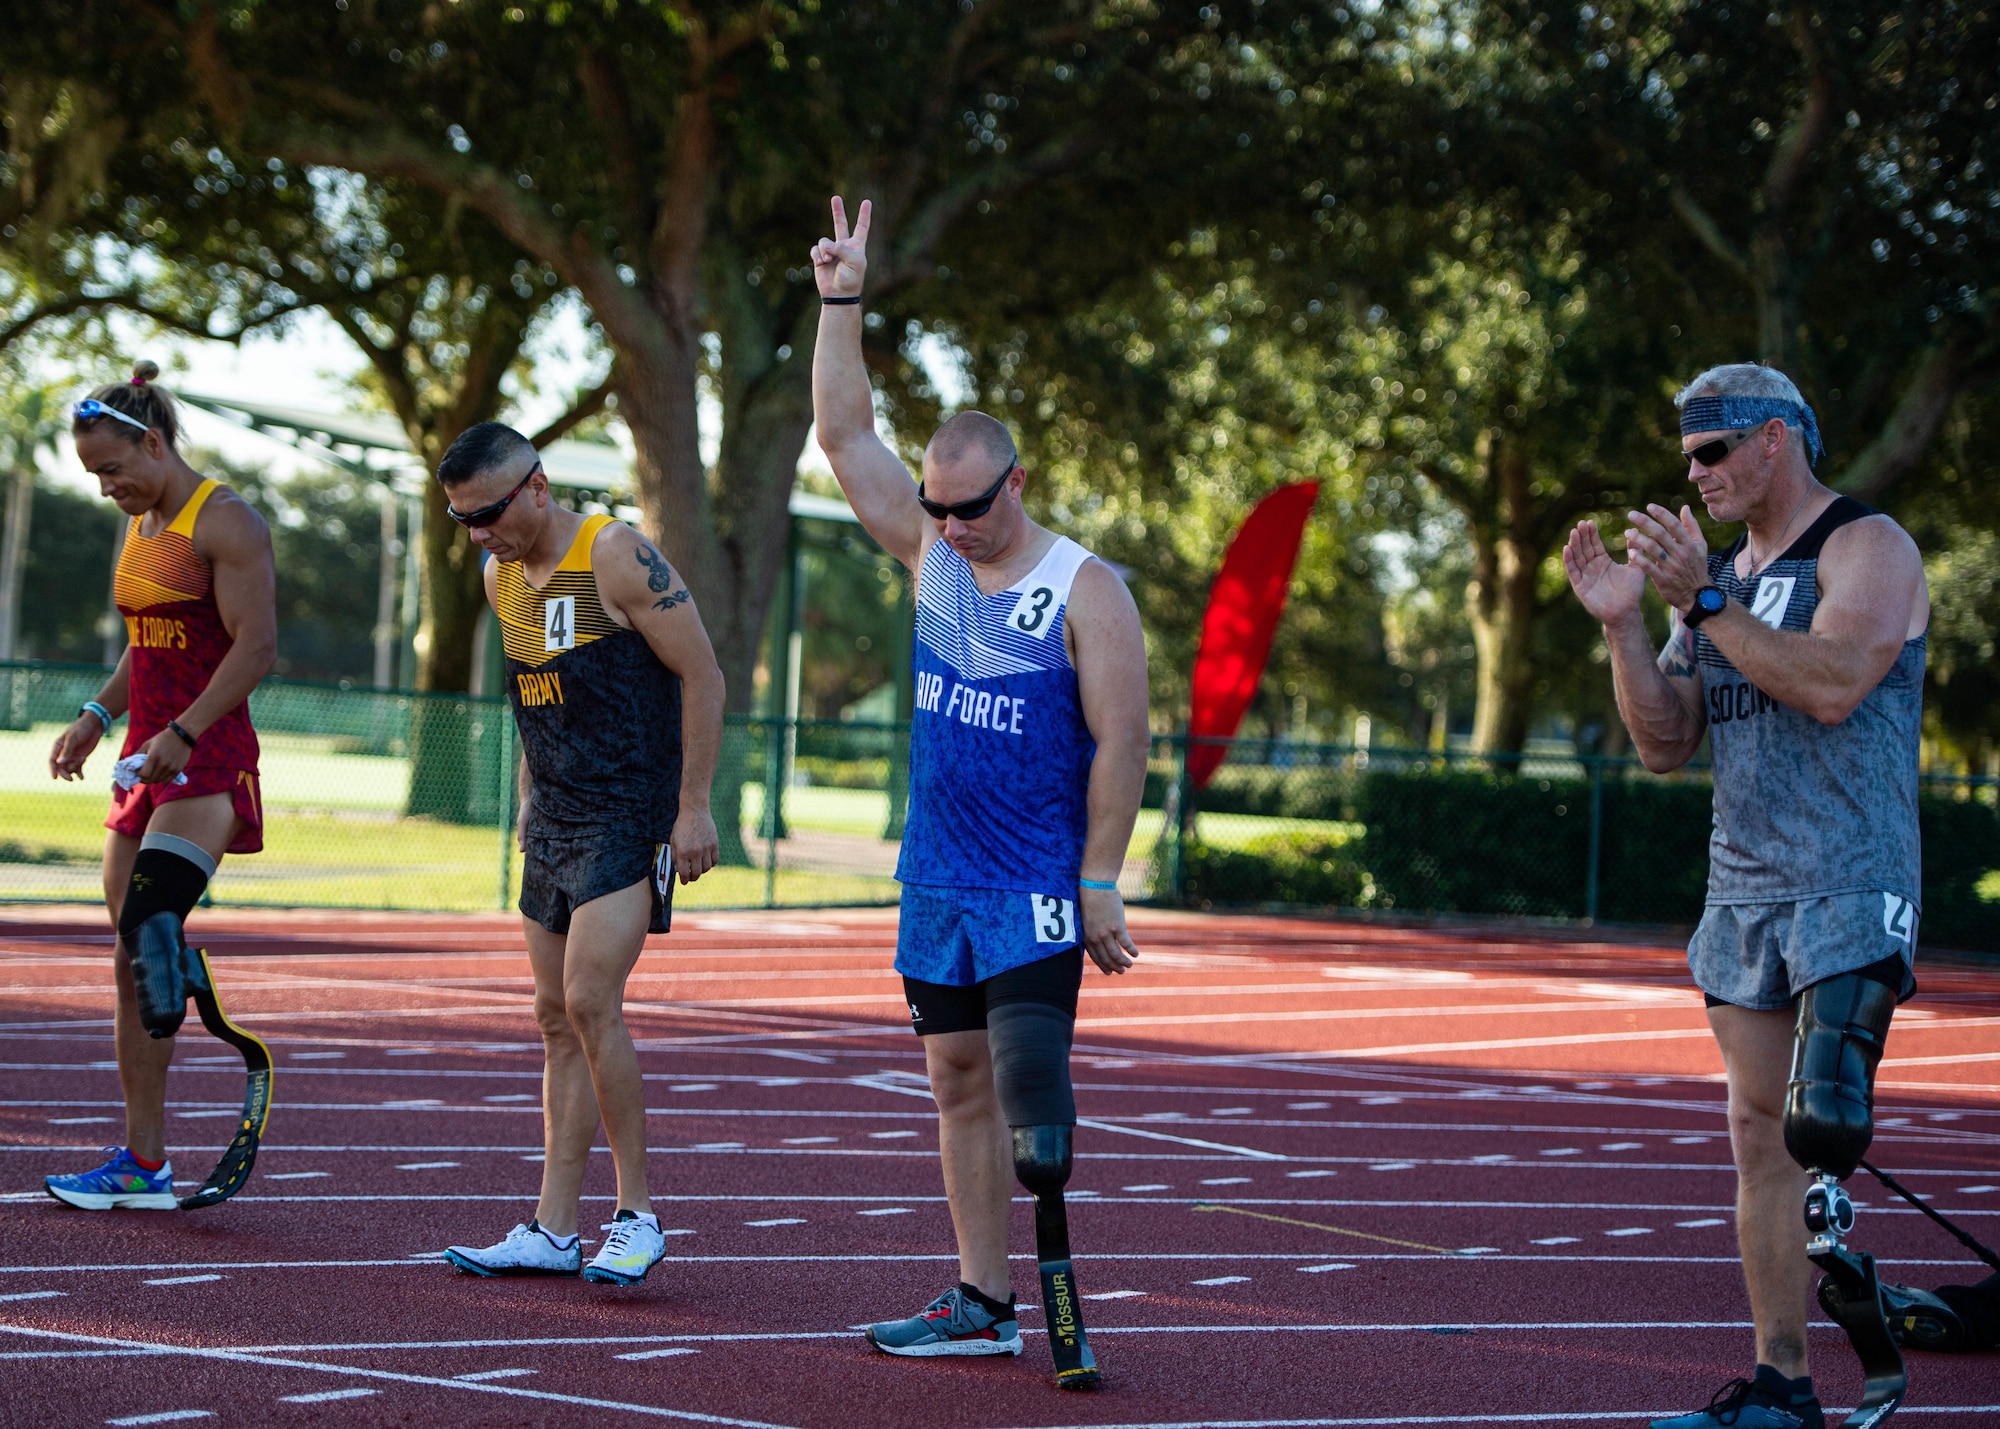 U.S. Air Force Senior MSgt. Benjamin Seekell, a Team Air Force Warrior Games athlete, poses at the starting line prior to a race during a track competition at the 2022 Department of Defense Warrior Games, August 25th, 2022, in Orlando, Florida.